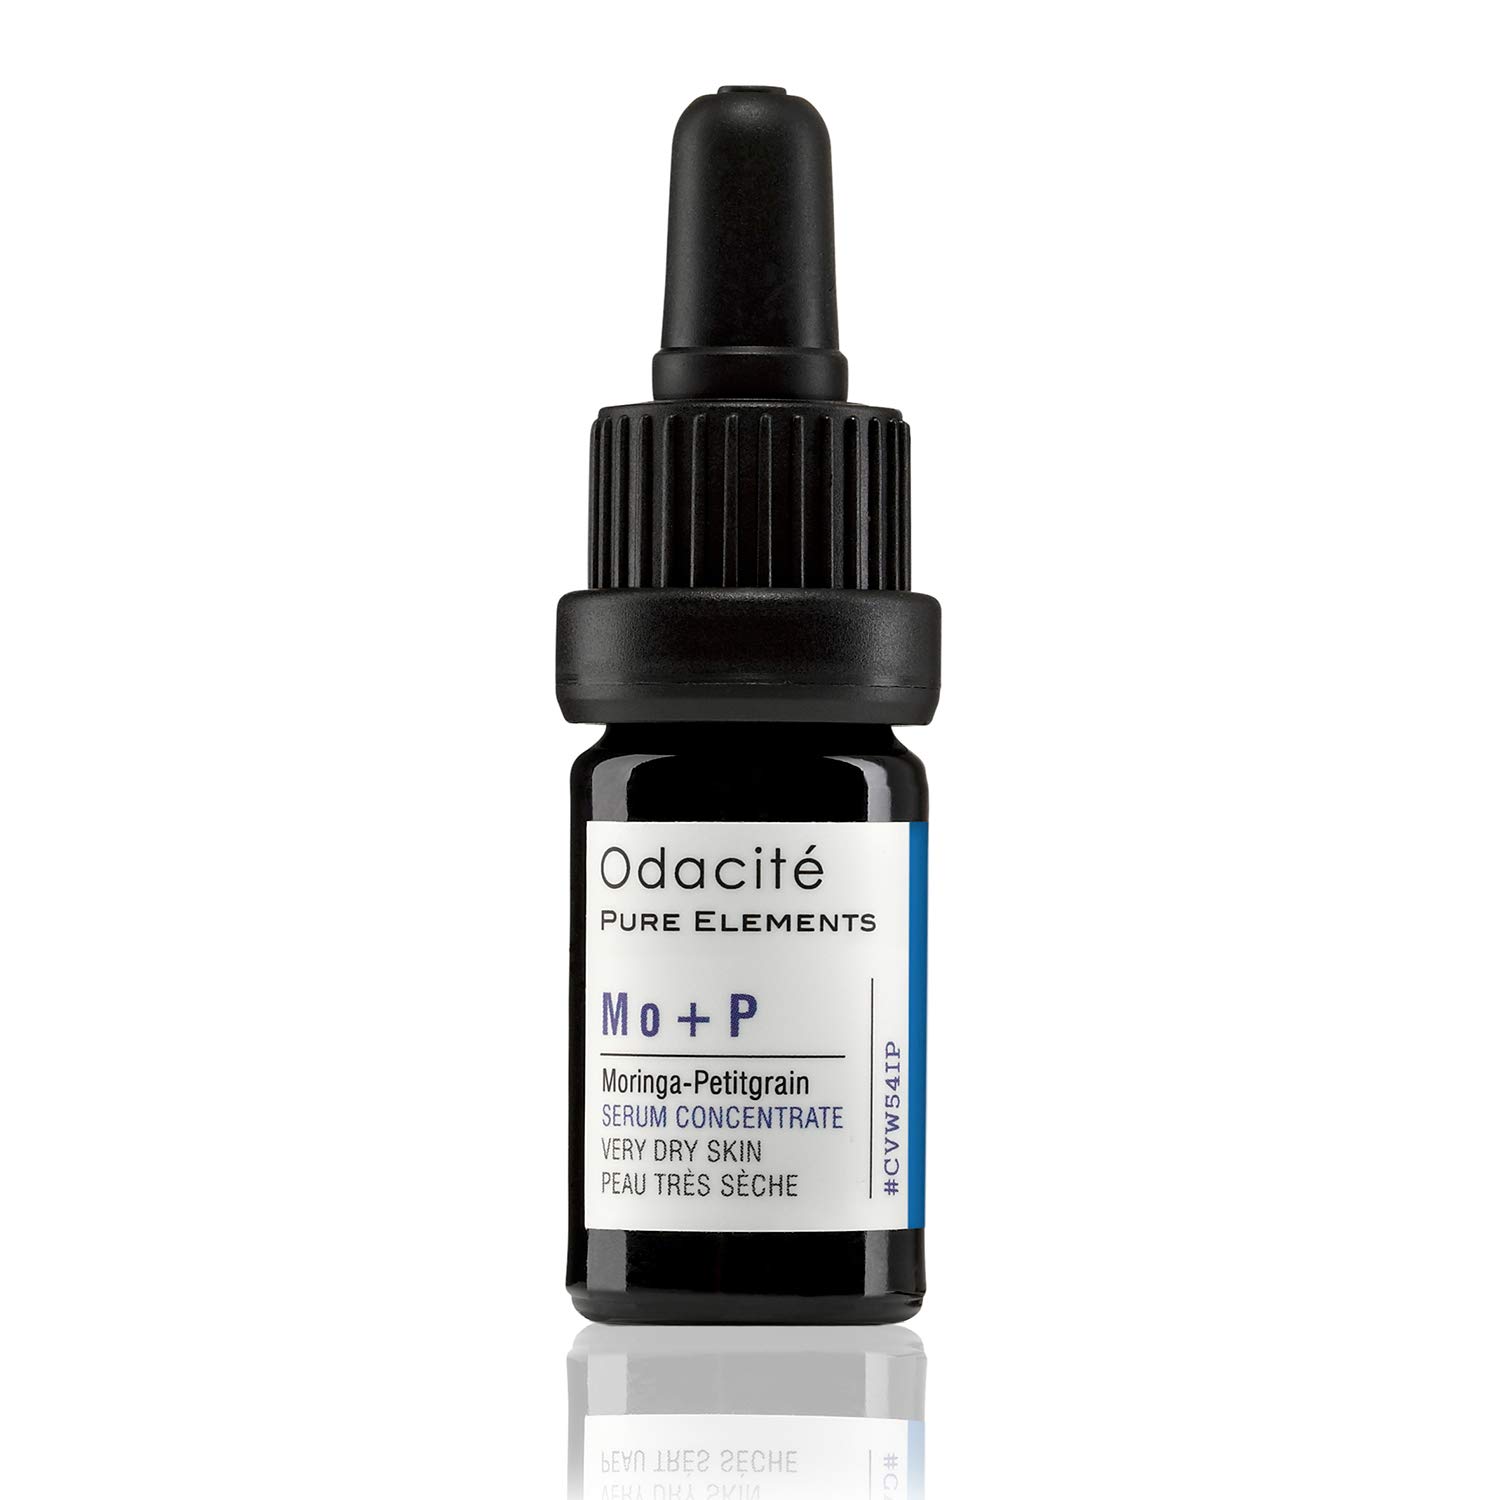 Odacité - Mo+P Very Dry Skin Face Serum Concentrate